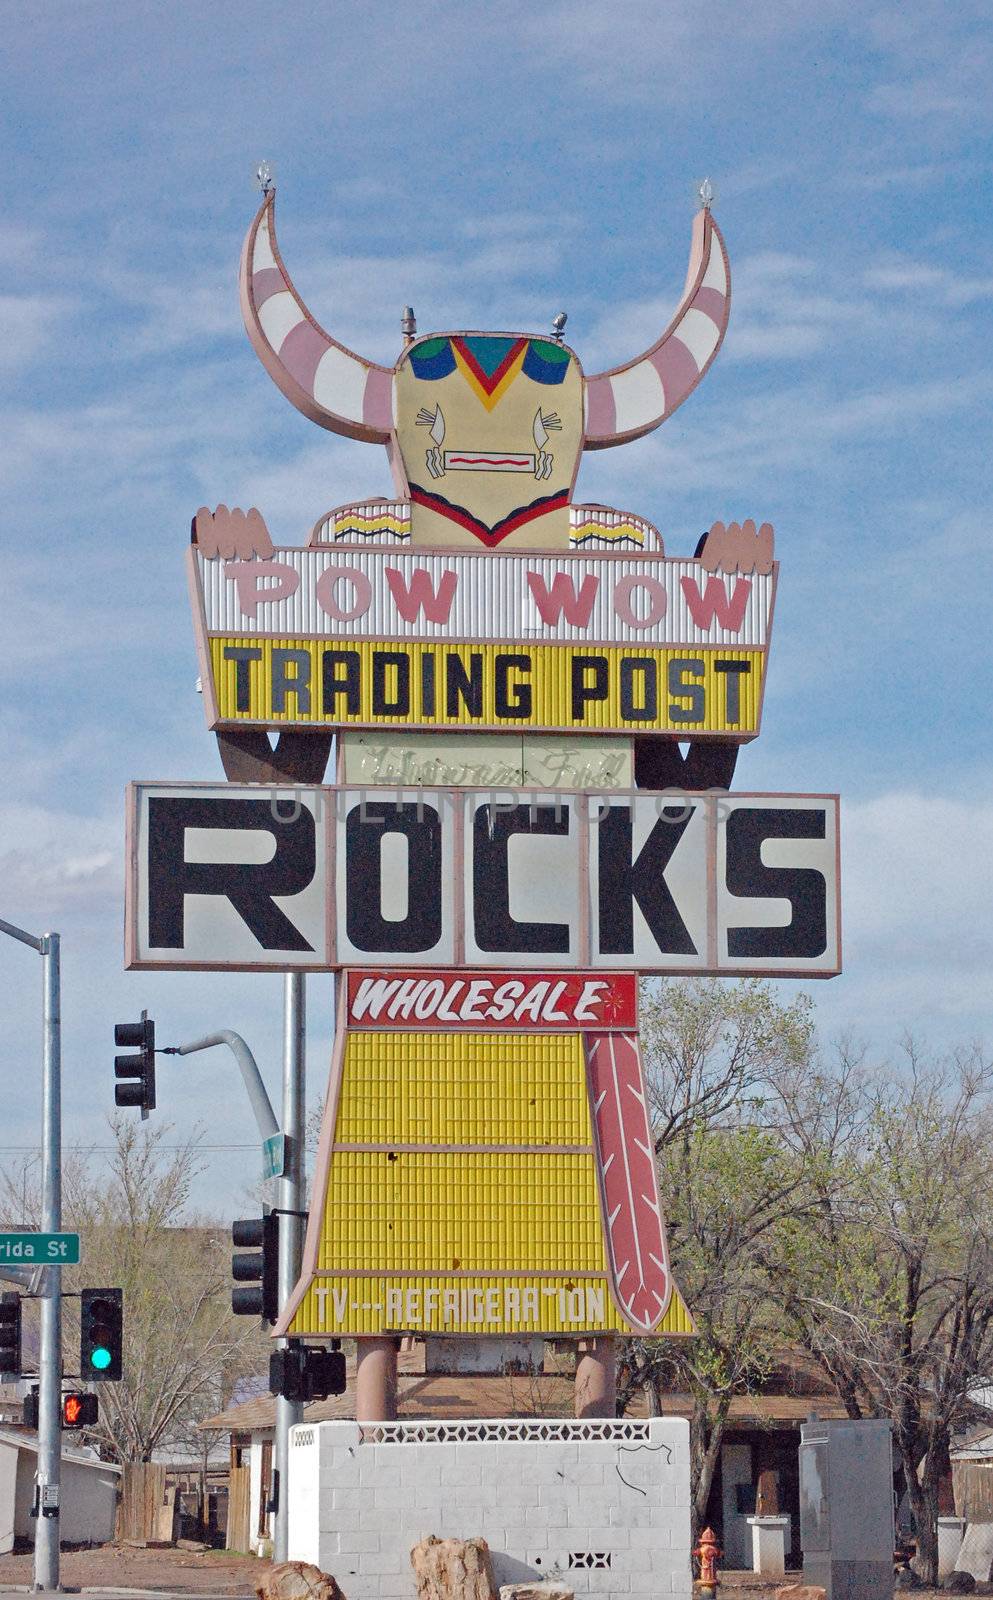 Pow Wow Trading Post Rocks by RefocusPhoto